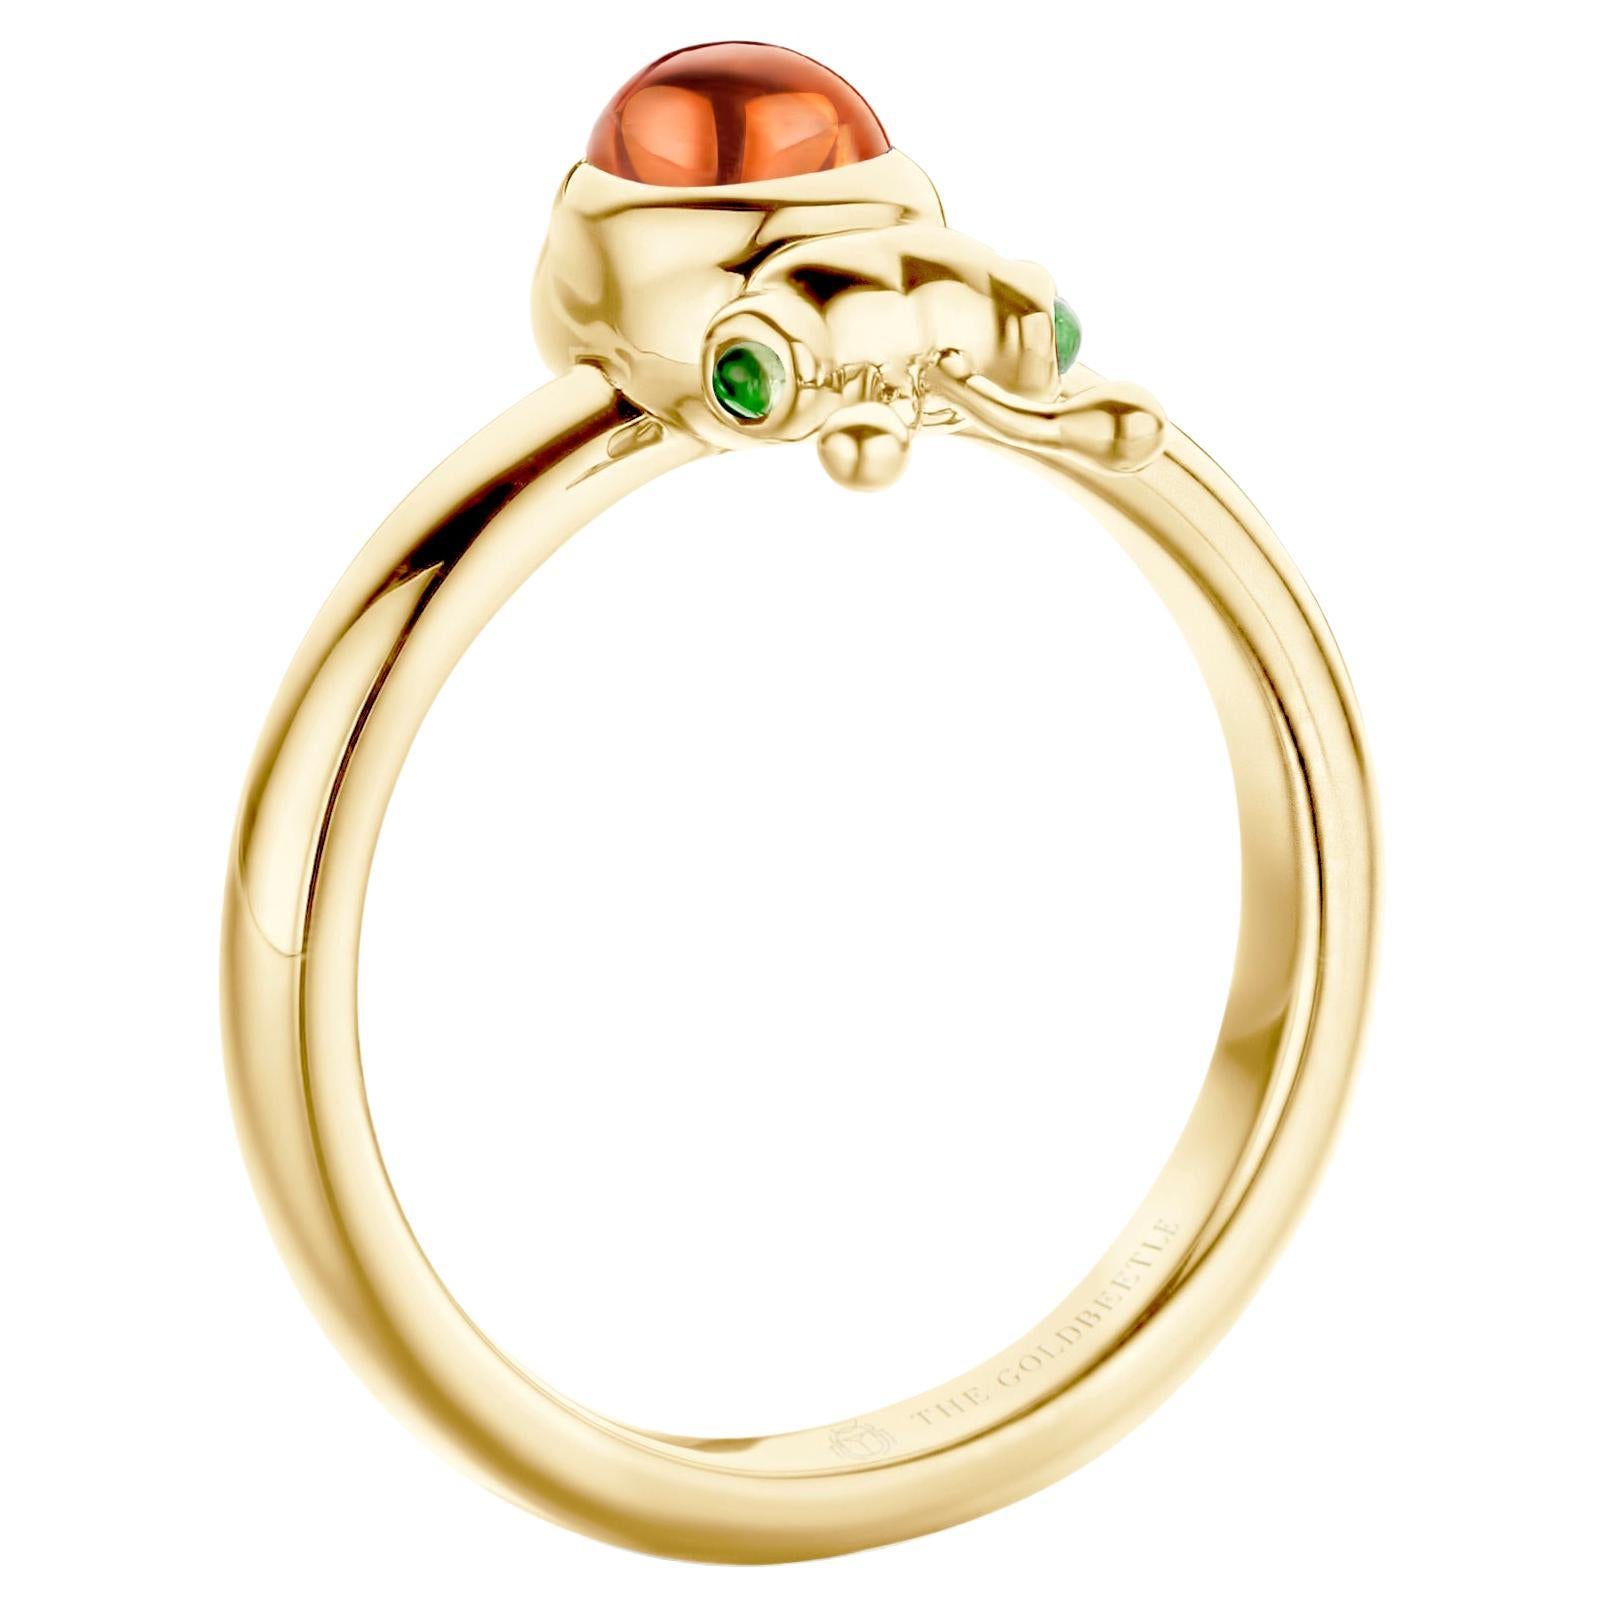 18-karat yellow gold Lilou ring set with one natural pear-shaped cabochon Mandarin Garnet and two natural Tsavorites in round cabochon cut.
Celine Roelens, a goldsmith and gemologist, specializes in unique, fine jewelry, handmade in Belgium and